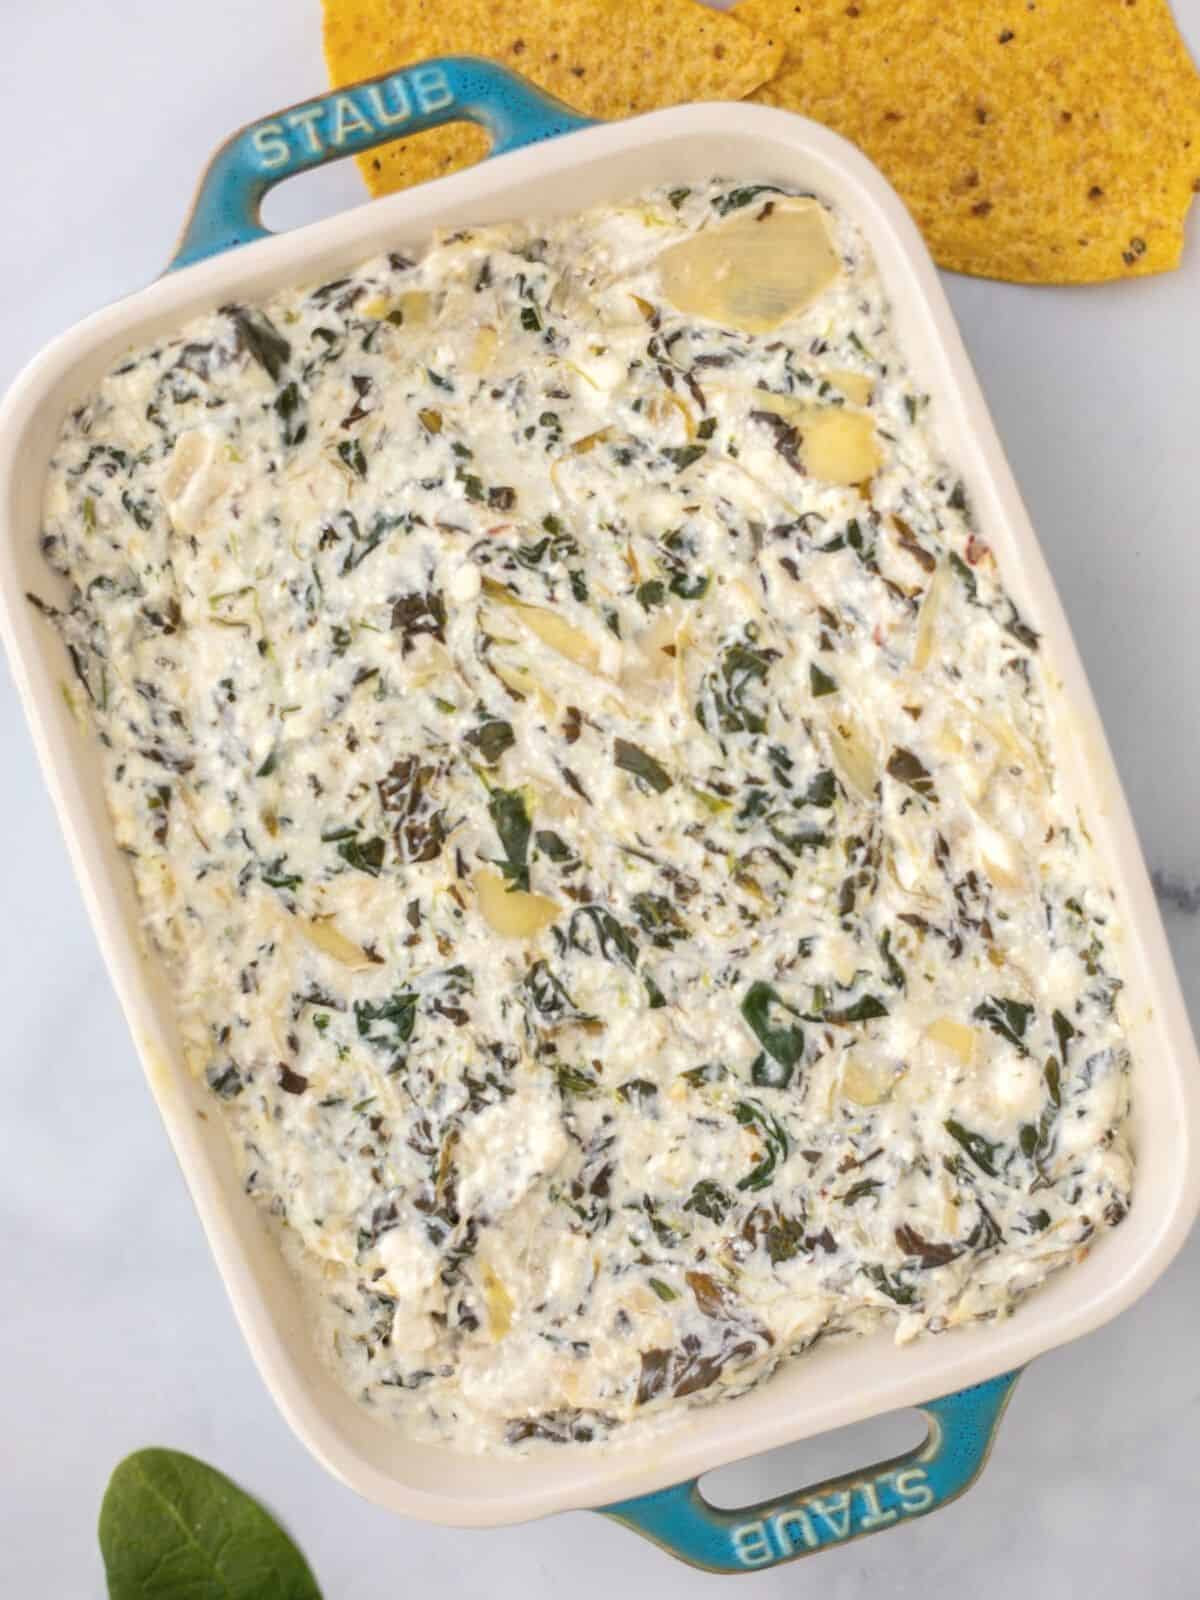 Spinach Artichoke Dip Spread out in blue casserole pan next to chips and fresh spinach.